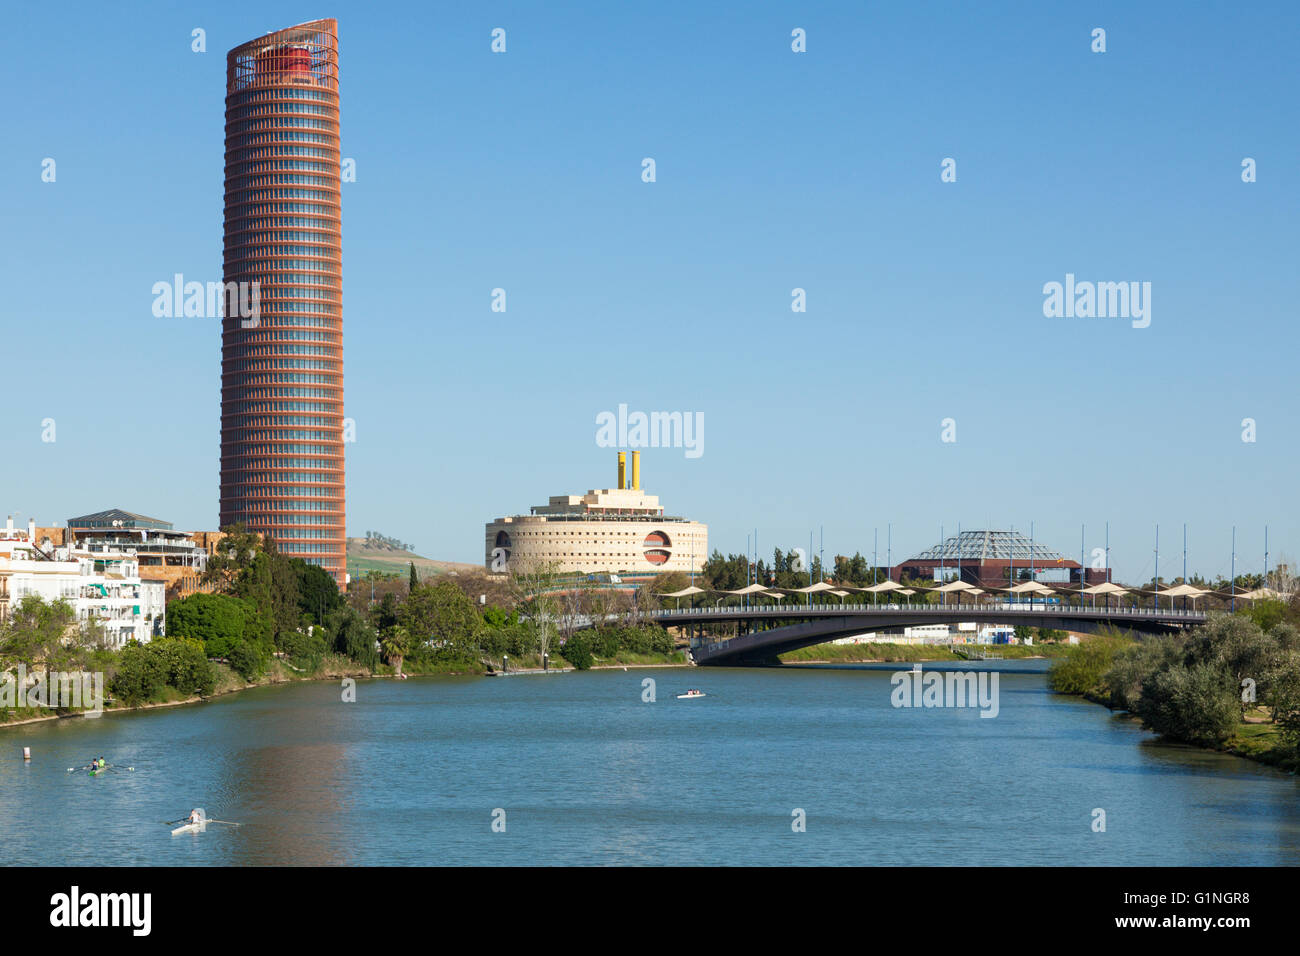 The Sevilla Tower or Cajasol by architect César Pelli and Torre Triana by Francisco Javier Sáenz at Guadalquivir river Stock Photo